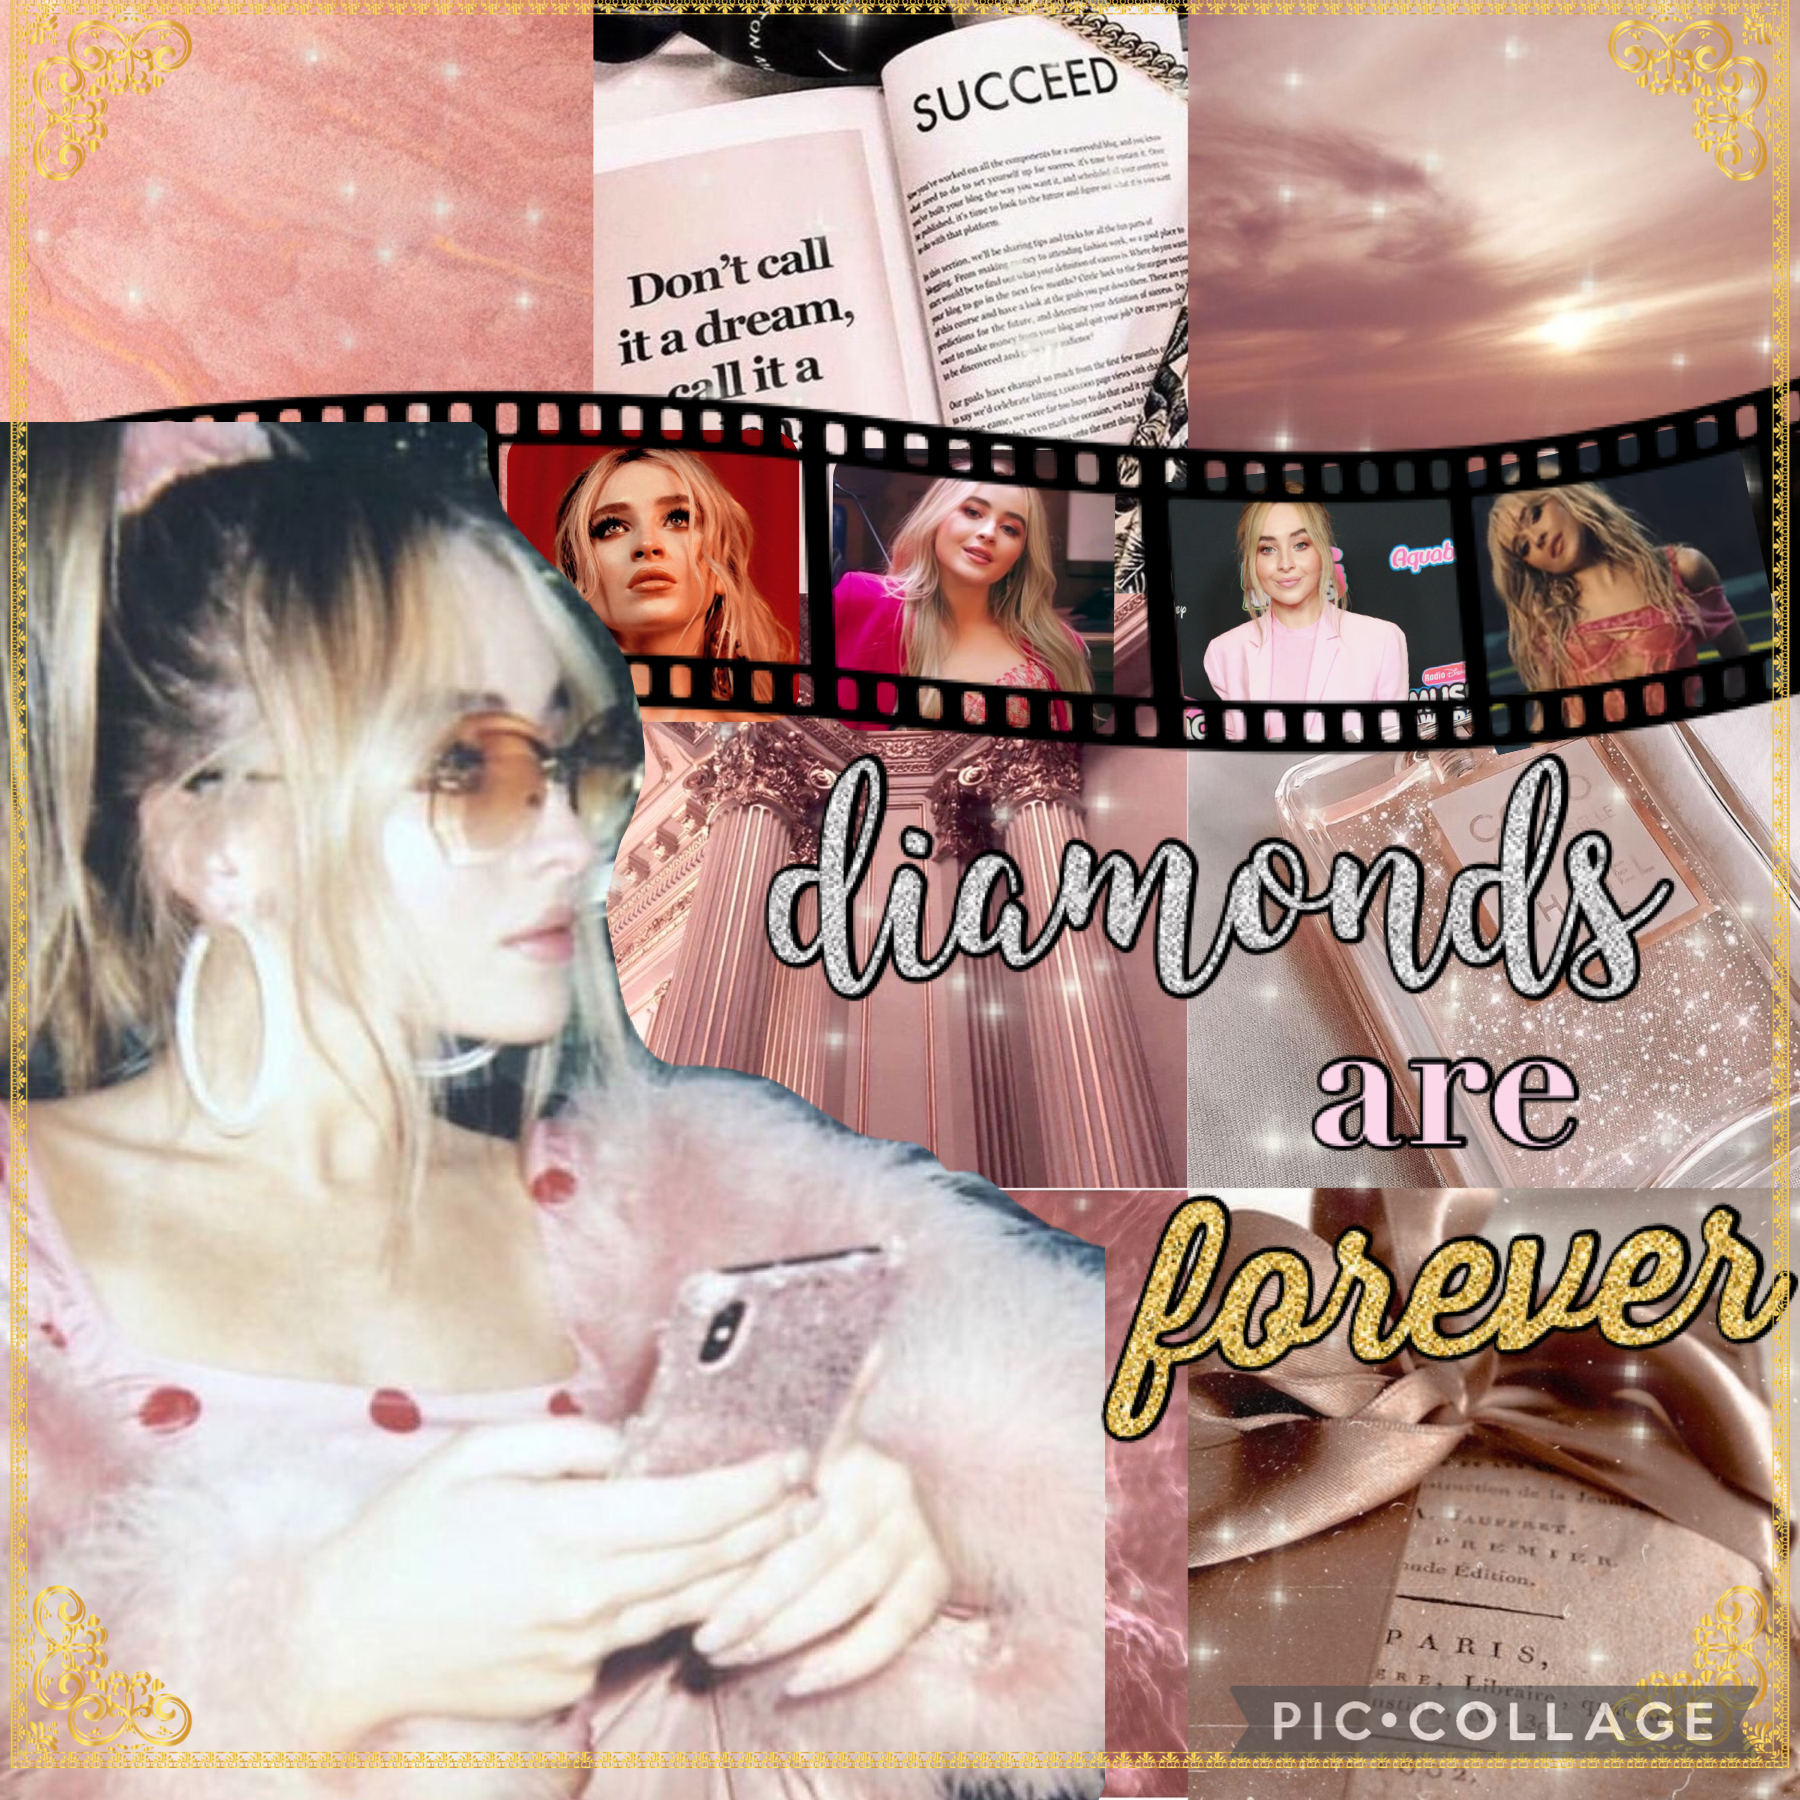 4.3.22 Sabrina Carpenter aesthetic collage inspired by Moonlightcocoa 